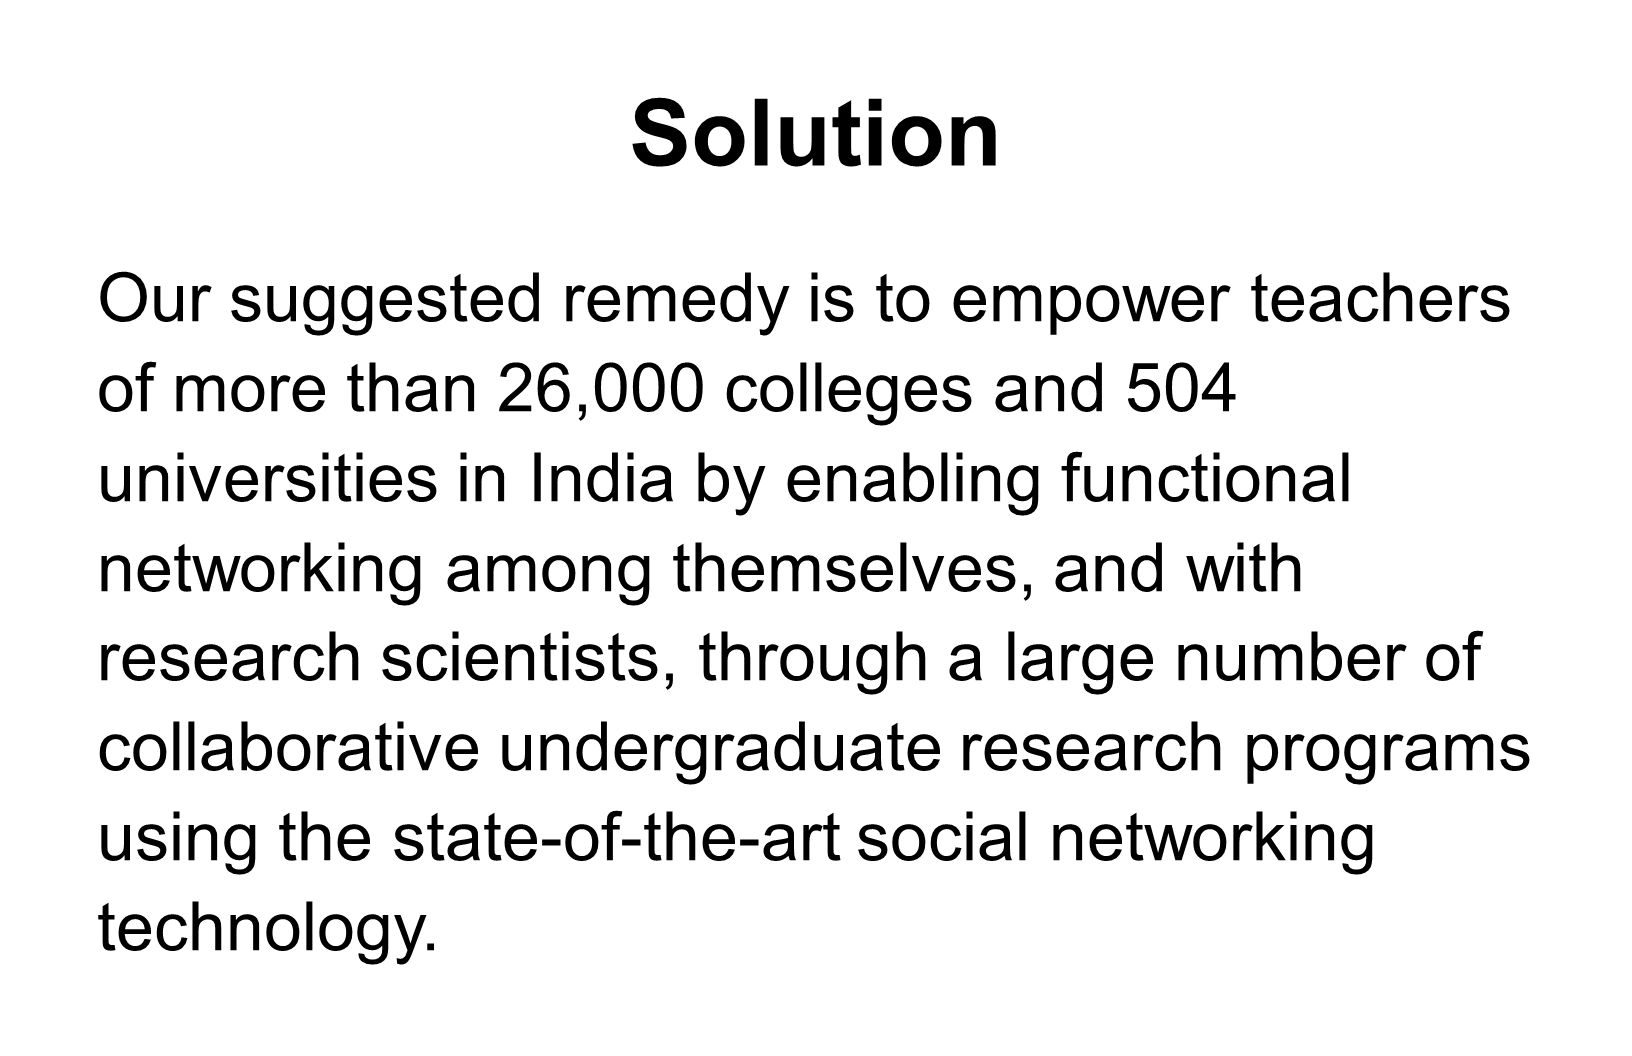 Solution Our suggested remedy is to empower teachers of more than 26,000 colleges and 504 universities in India by enabling functional networking among themselves, and with research scientists, through a large number of collaborative undergraduate research programs using the state-of-the-art social networking technology.